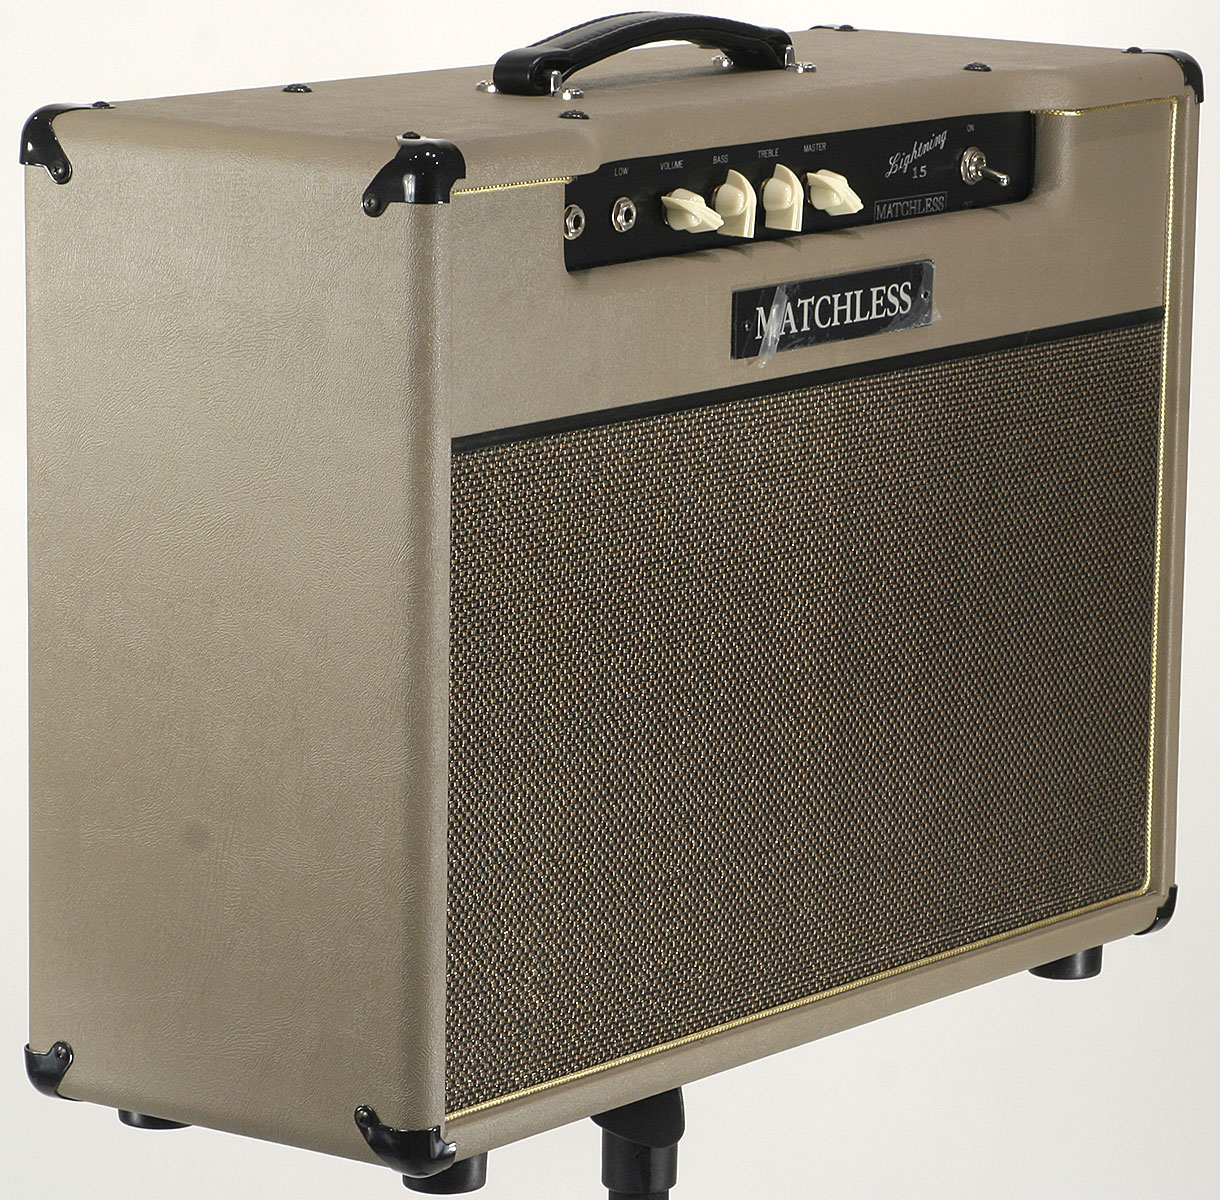 Matchless Lightning 15 112 15w 1x12 Cappucino/gold - Electric guitar combo amp - Variation 3